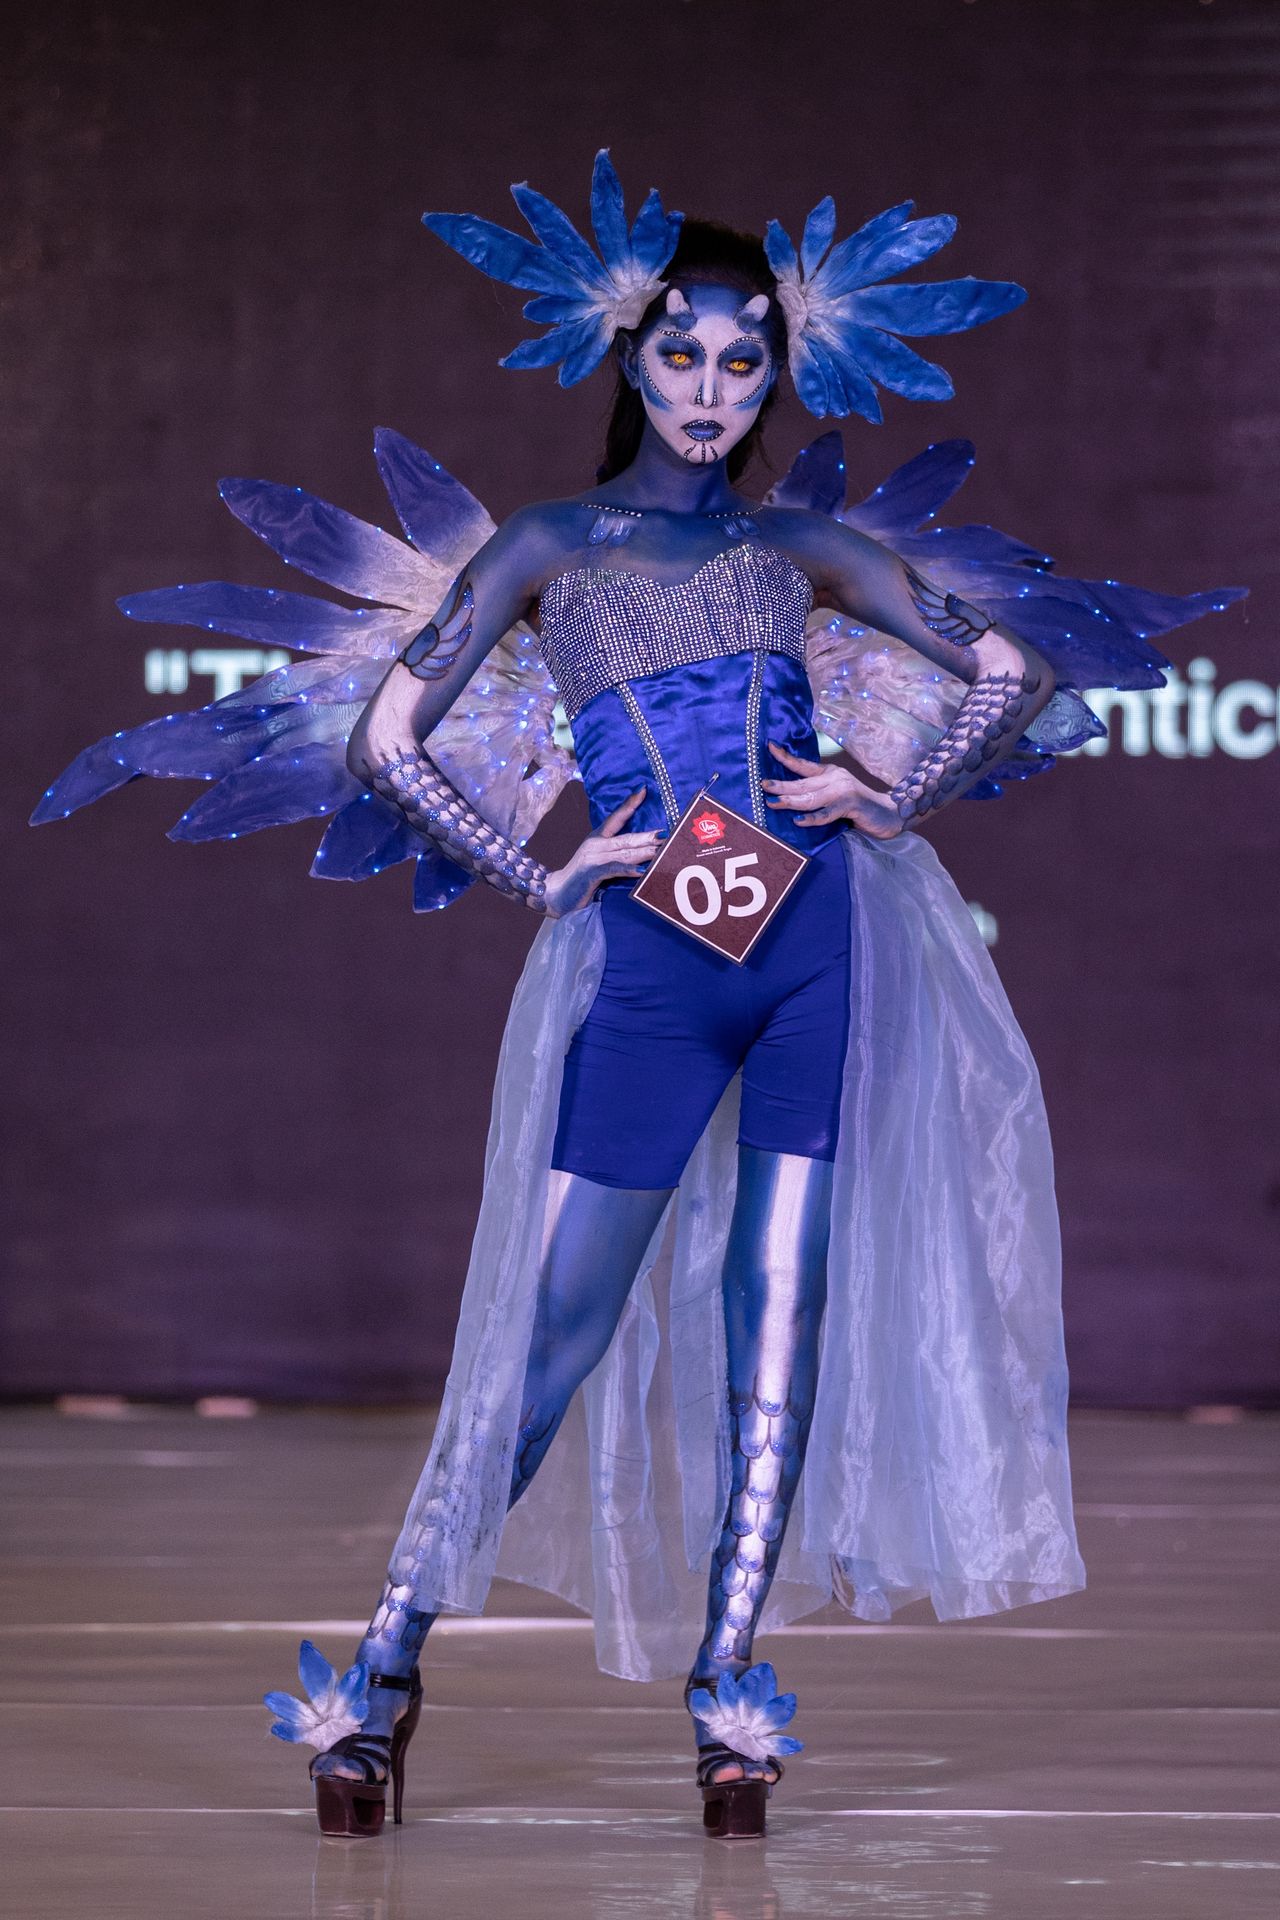 SURABAYA, INDONESIA - JUNE 21: A model showcases designs The Glaucus Atlanticus by Ninda Novianingsih on the runway during the body painting show : Miracle World The Ocean organized by Unipa Surabaya at Grand Atrium Royal Plaza on June 21, 2021 in Surabaya, Indonesia. (Photo by Robertus Pudyanto/Getty Images)